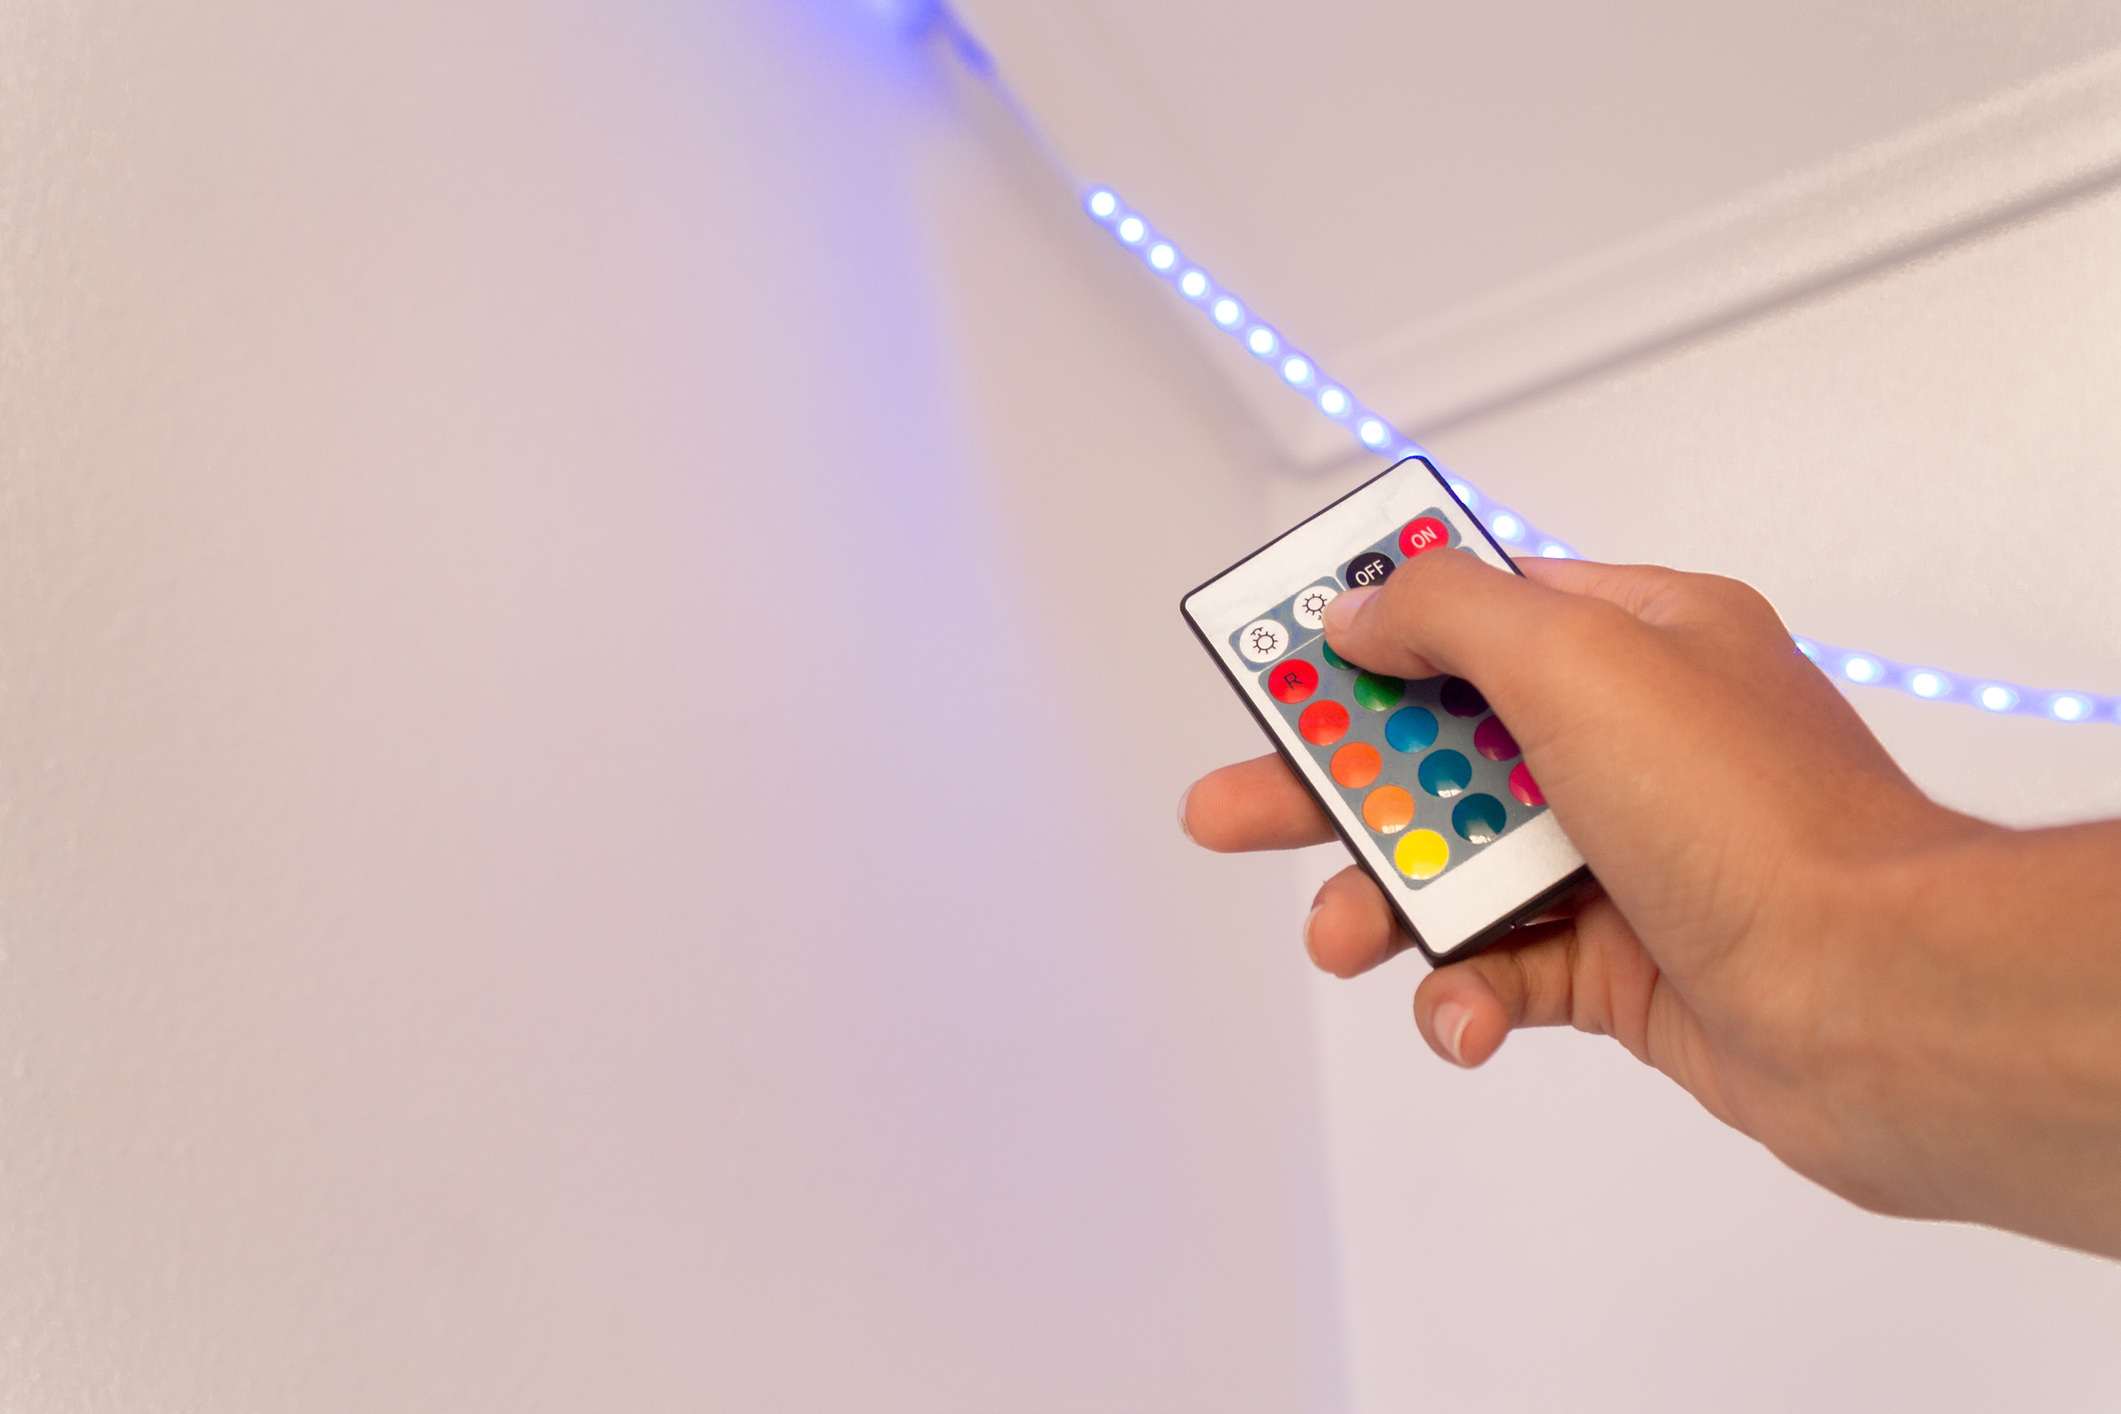 Hand holding a LED strip remote control on a white background, LED lights on and blue color of RGB LED strip pressing the remote control of the RGB LED lights